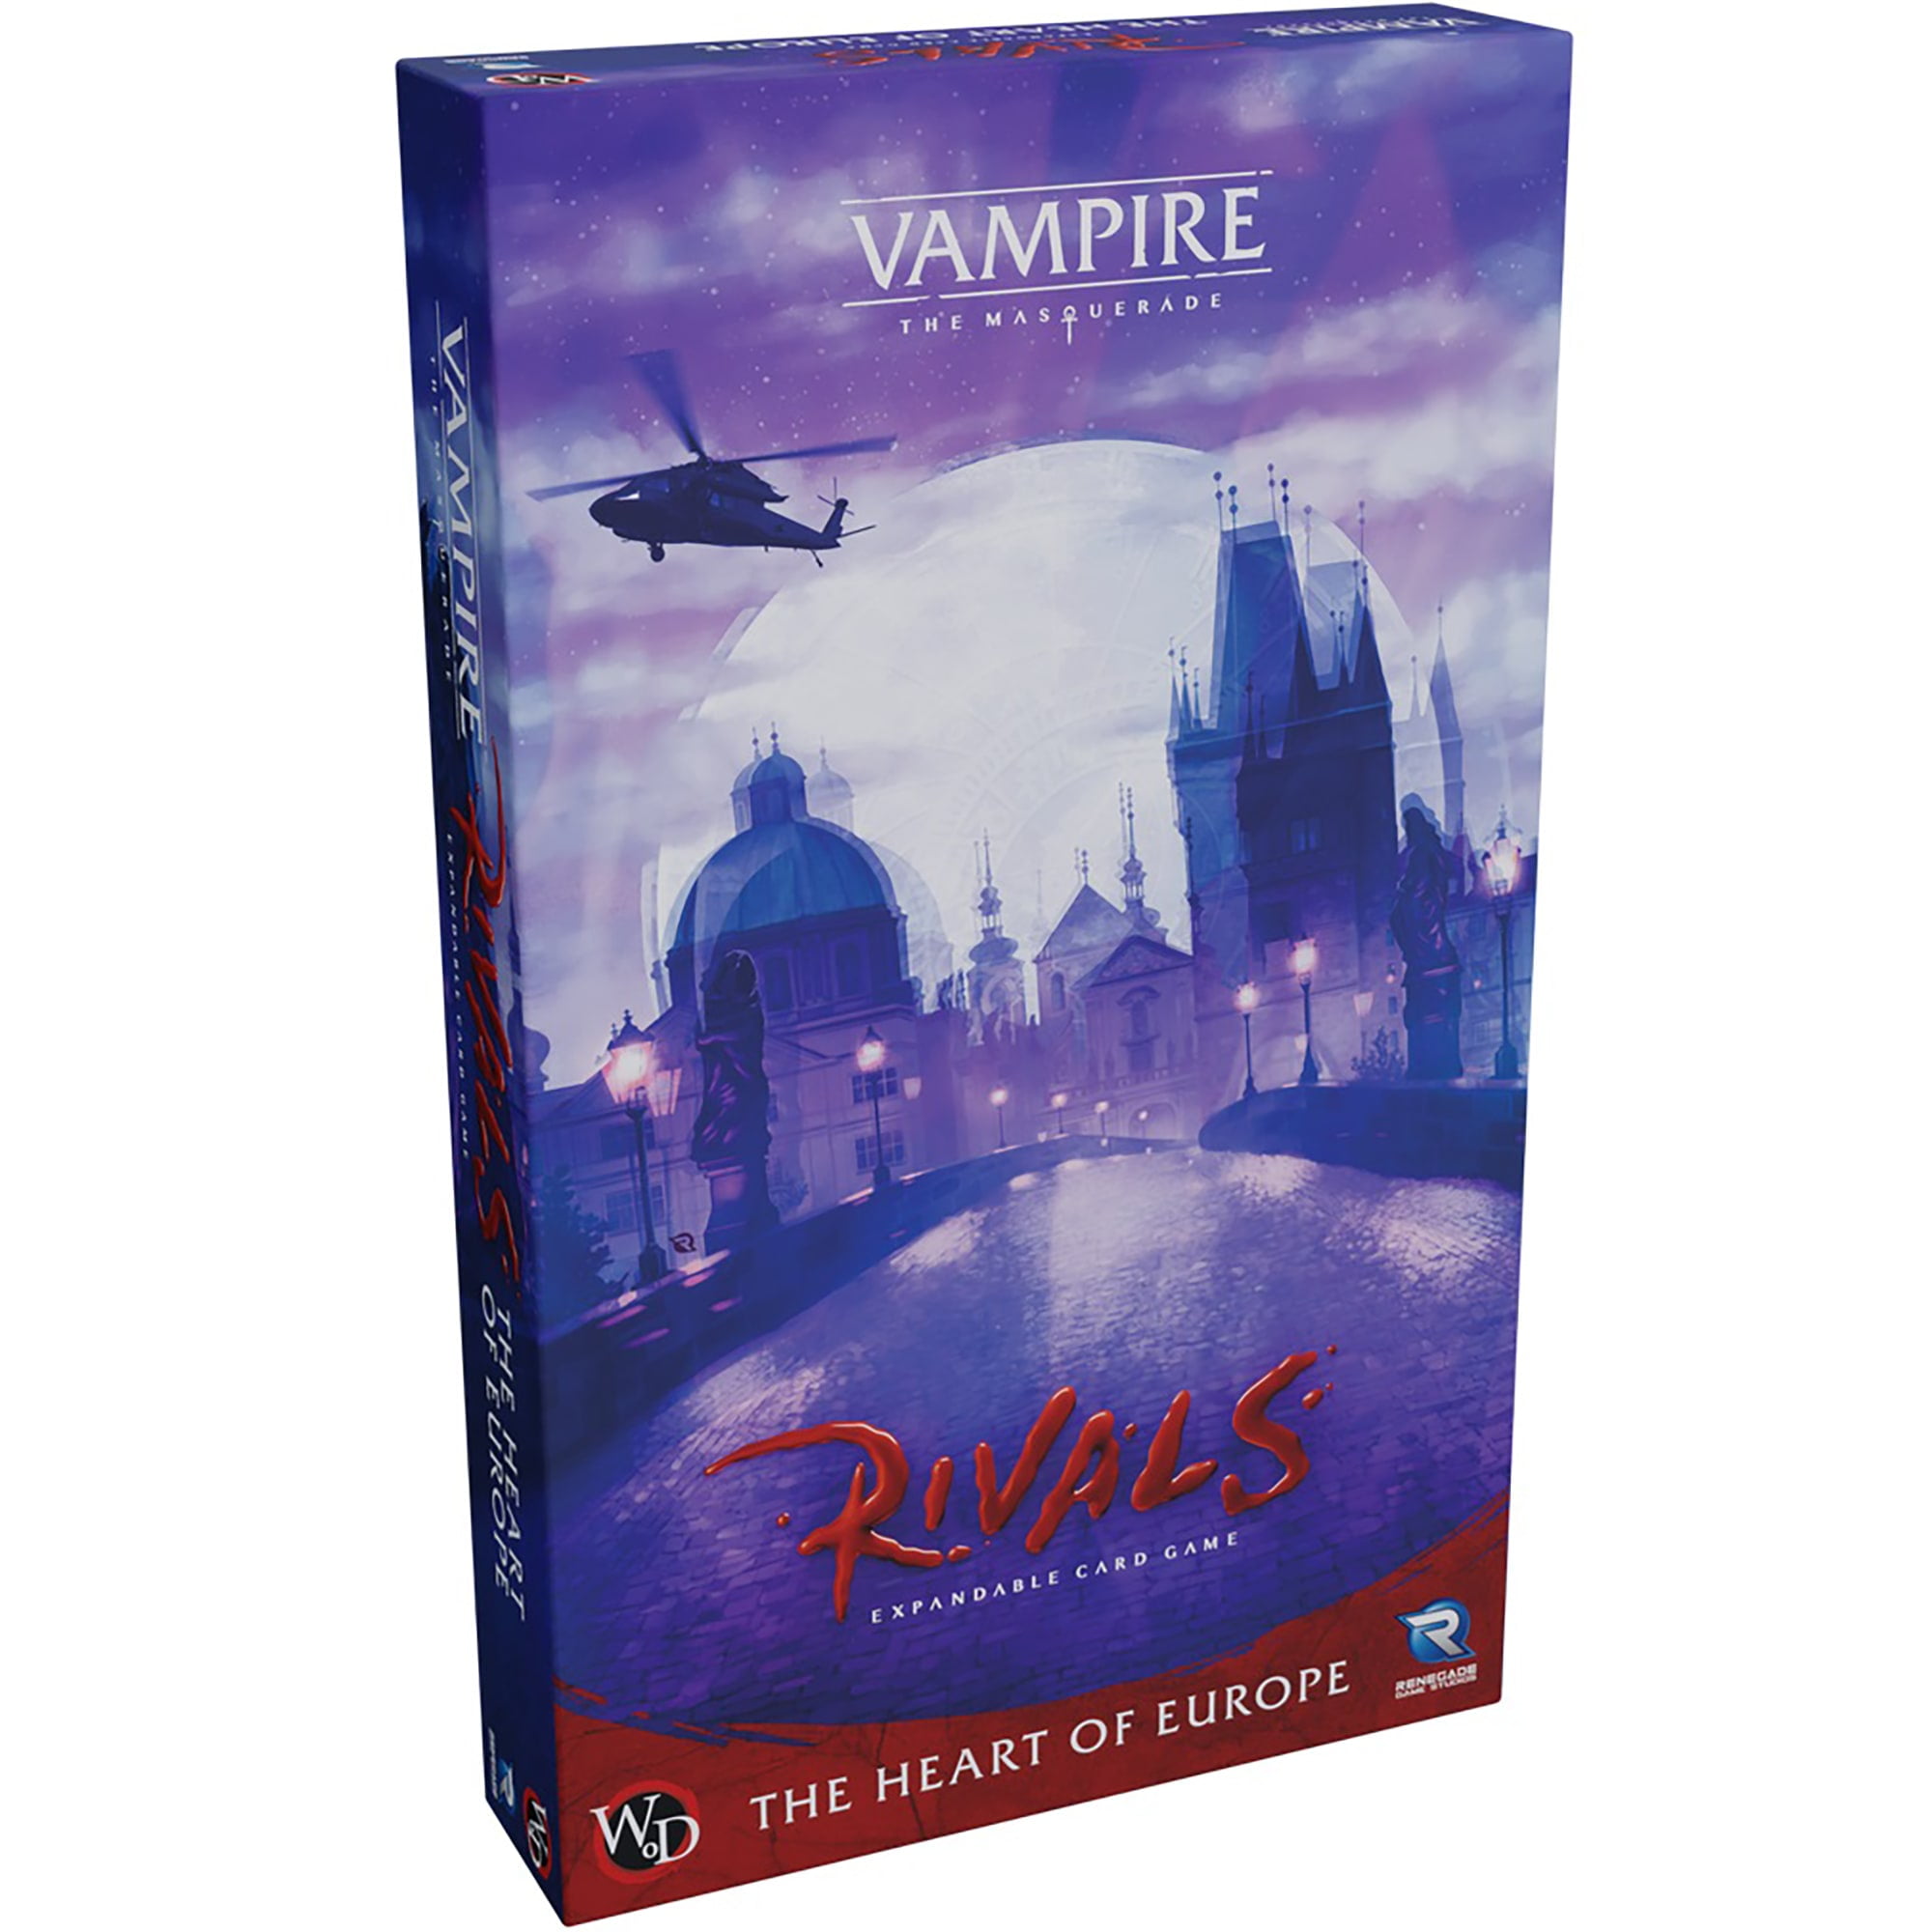 Vampire: The Masquerade Rivals Expandable Card Game The Heart Of Europe,  Expansion Card Set, Ages 14+, 2-4 Players, 30-70 Min 